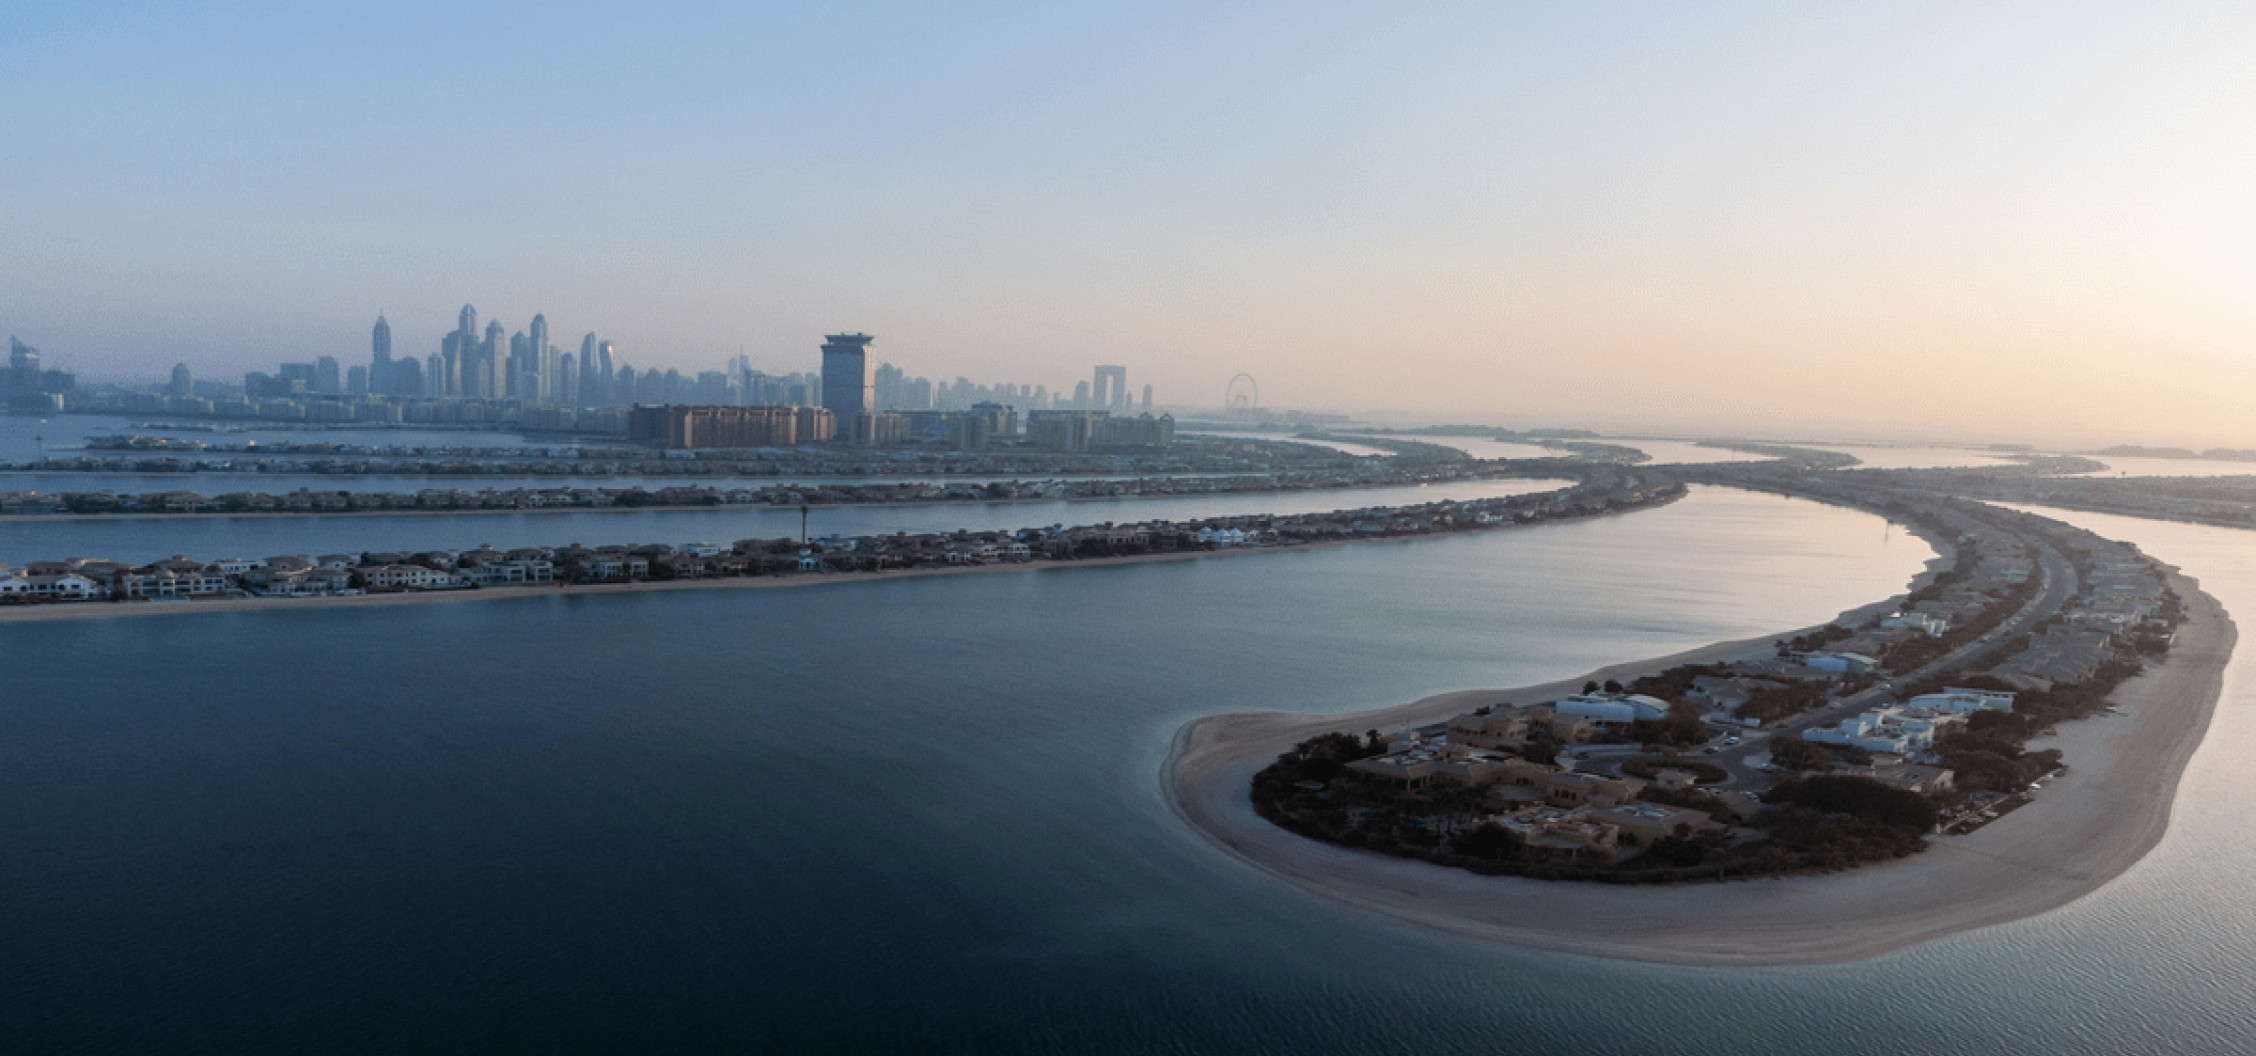 Top five best custom villas on the market located on Palm Jumeirah